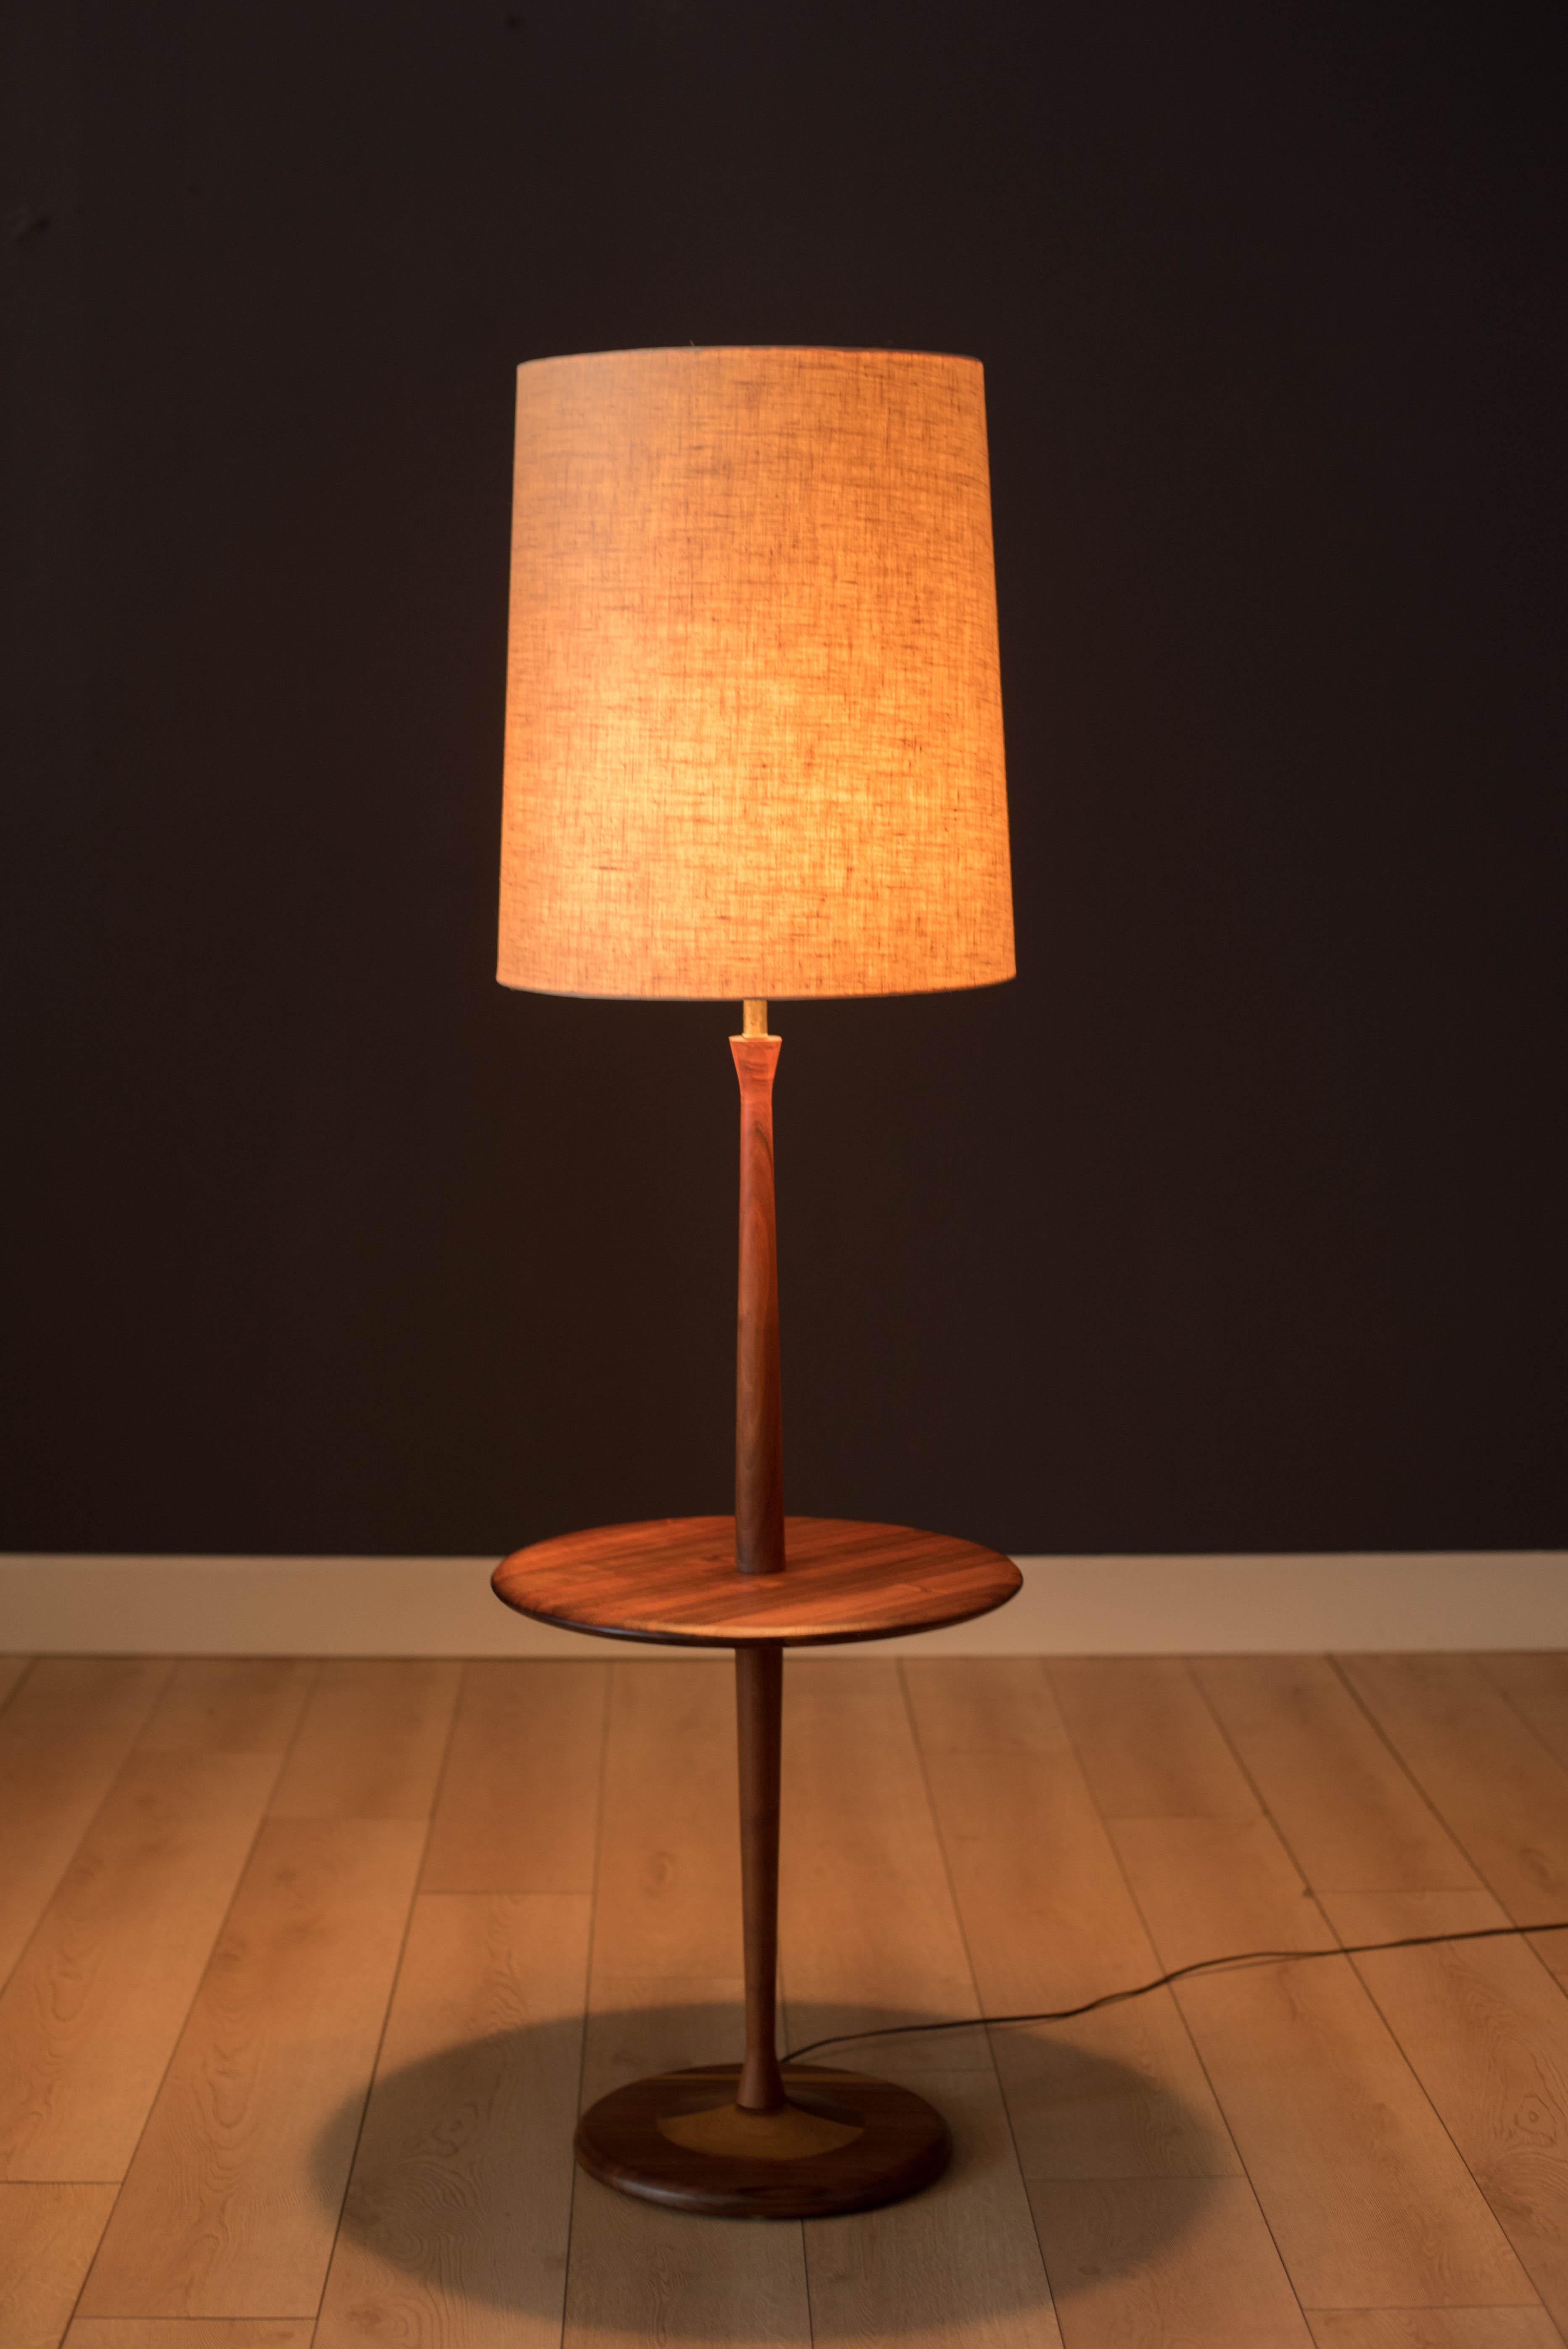 Vintage floor lamp with round side table by Laurel Lamp Co., circa 1960s. This piece is made of solid walnut and functions with a three-way switch. Drum shade is not included. 

 End table height: 20.5